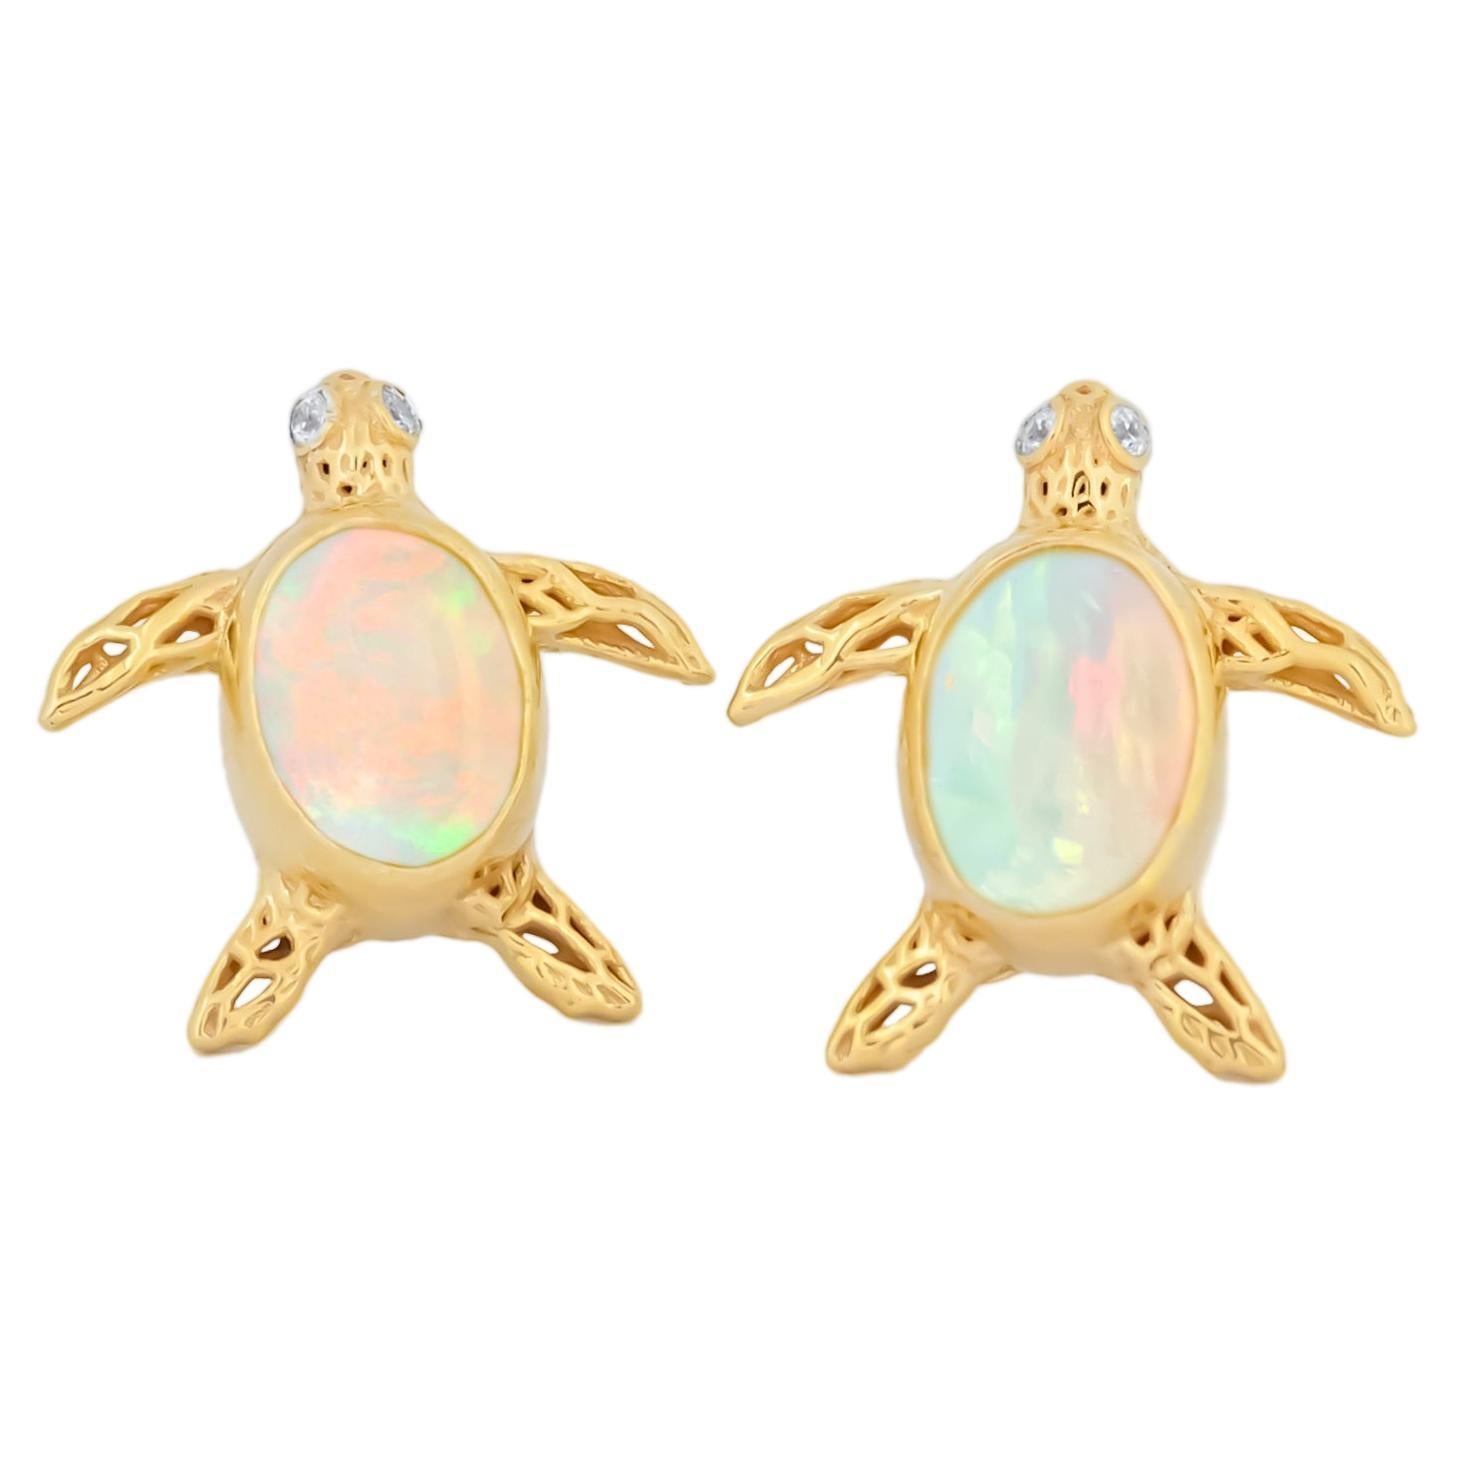 Turtle earrings studs with opals in 14k gold. For Sale